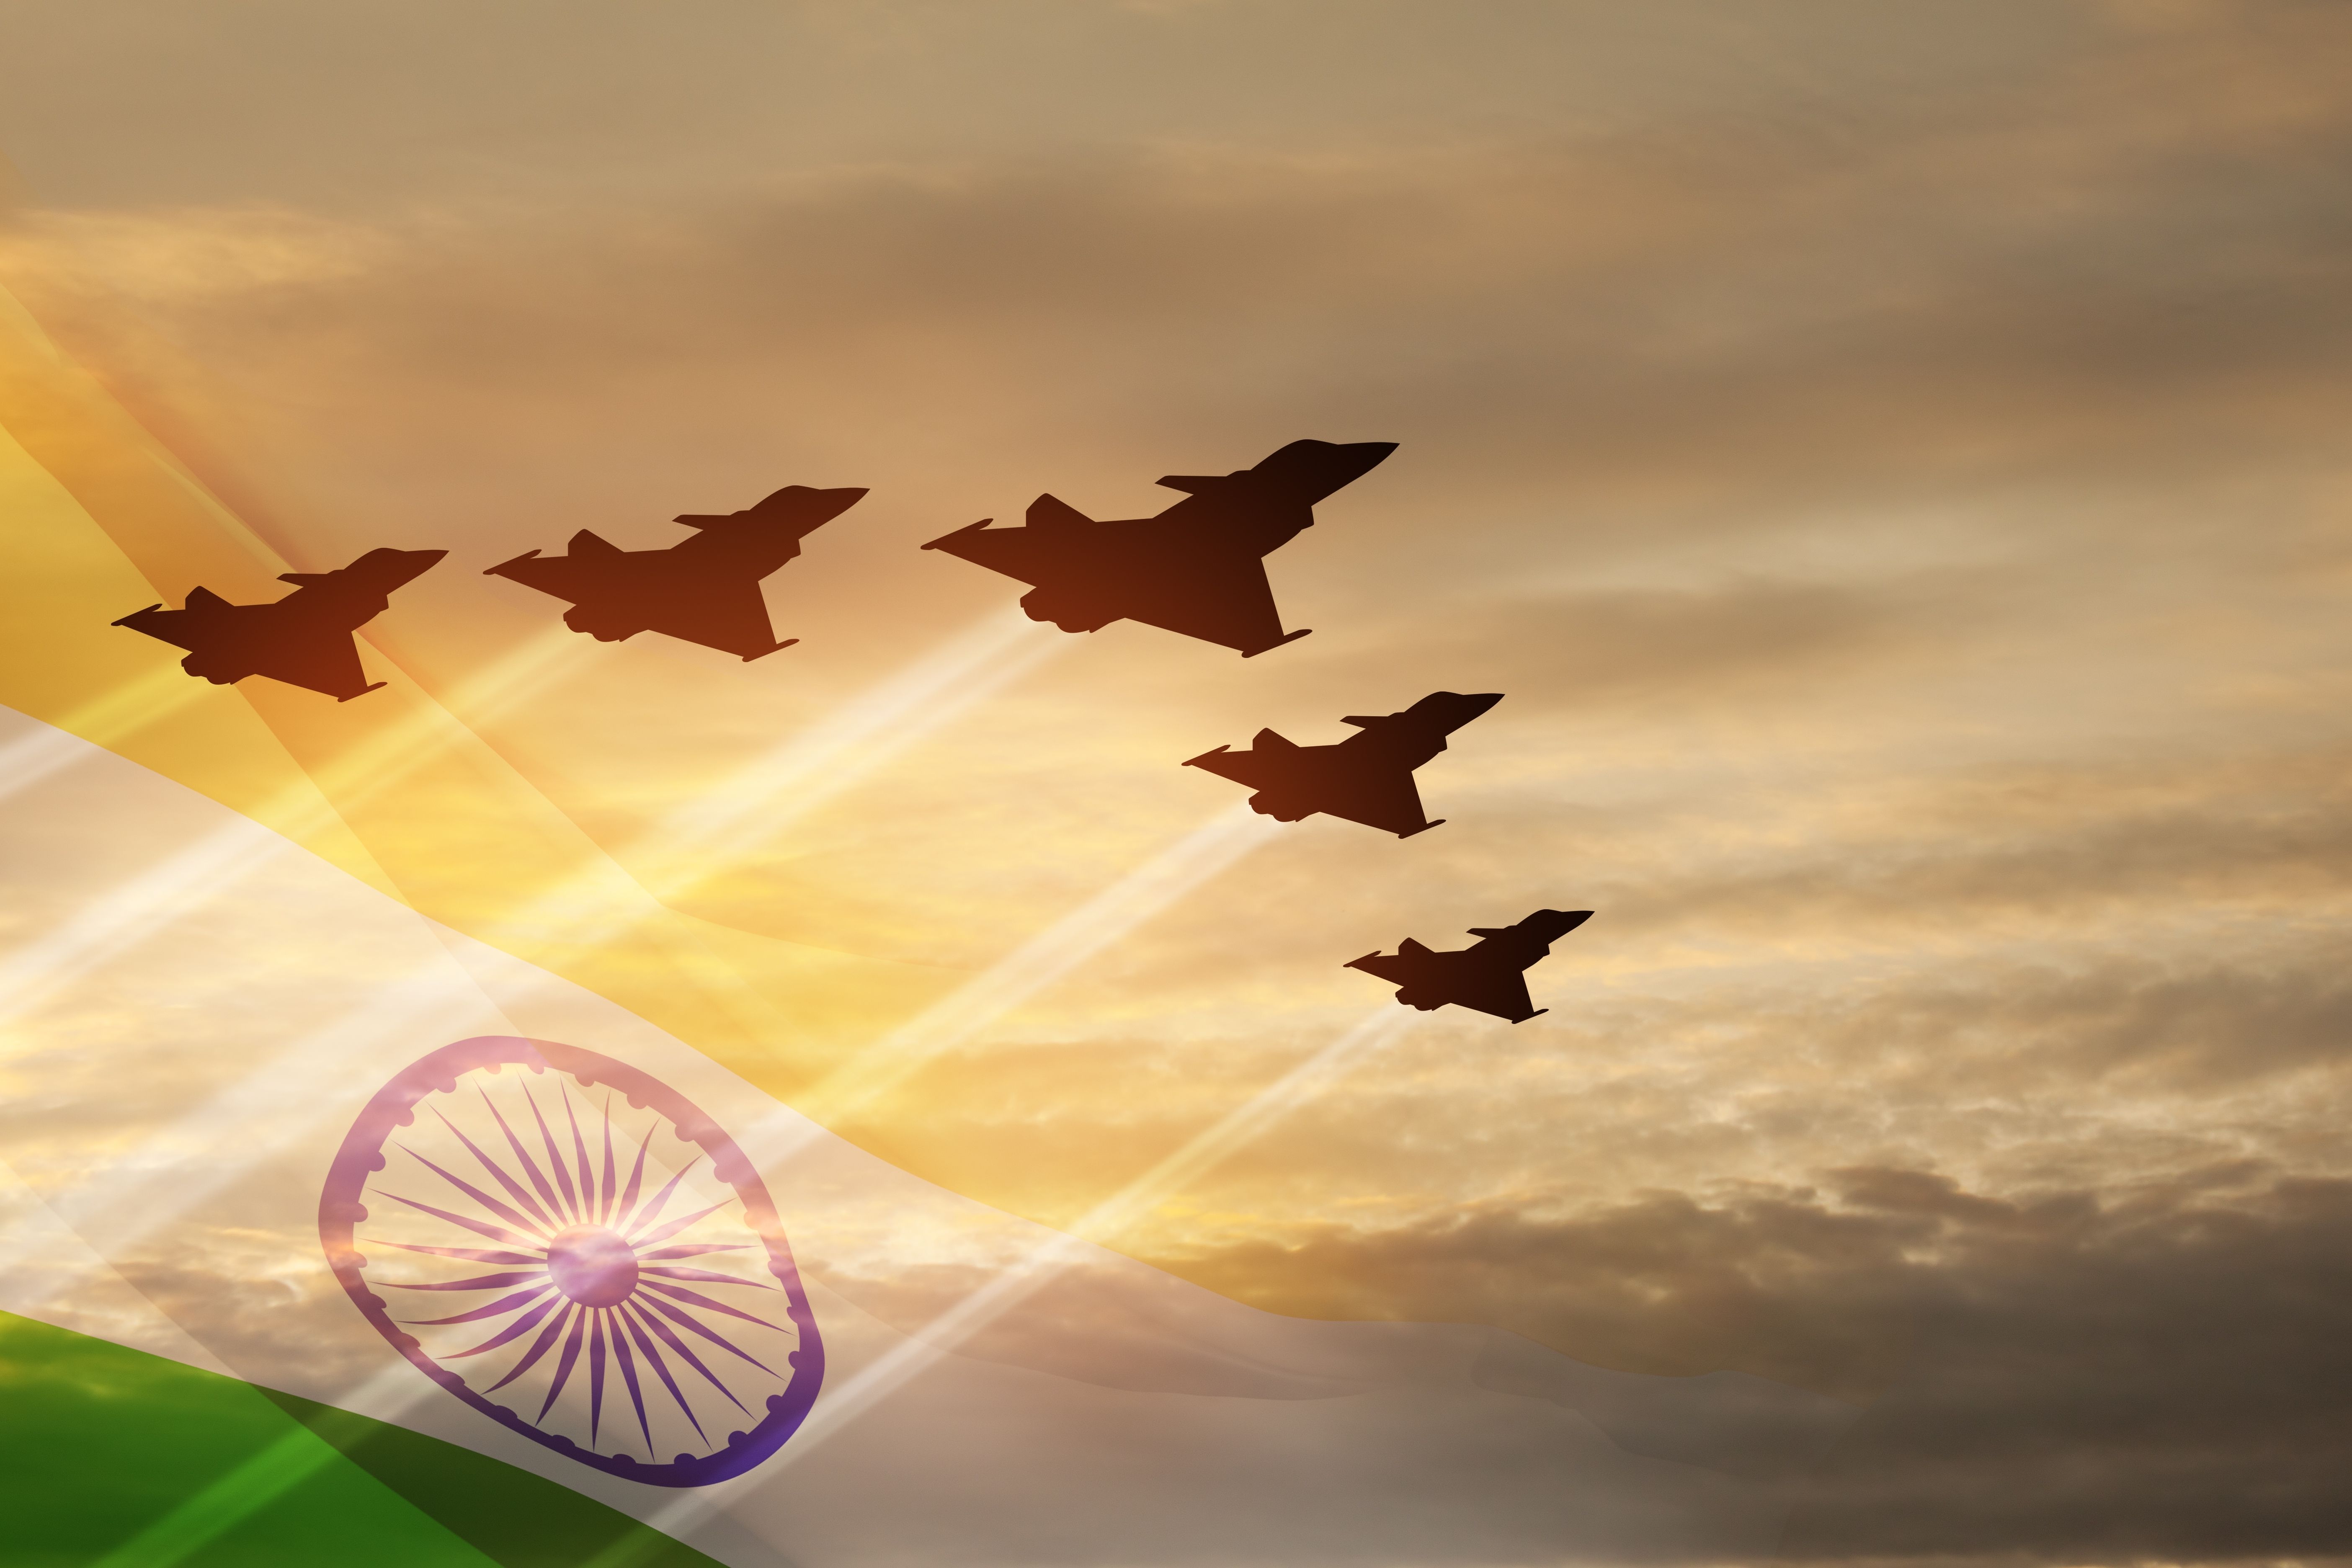 Indian jet air shows on background of sunset with transparent Indian flag.